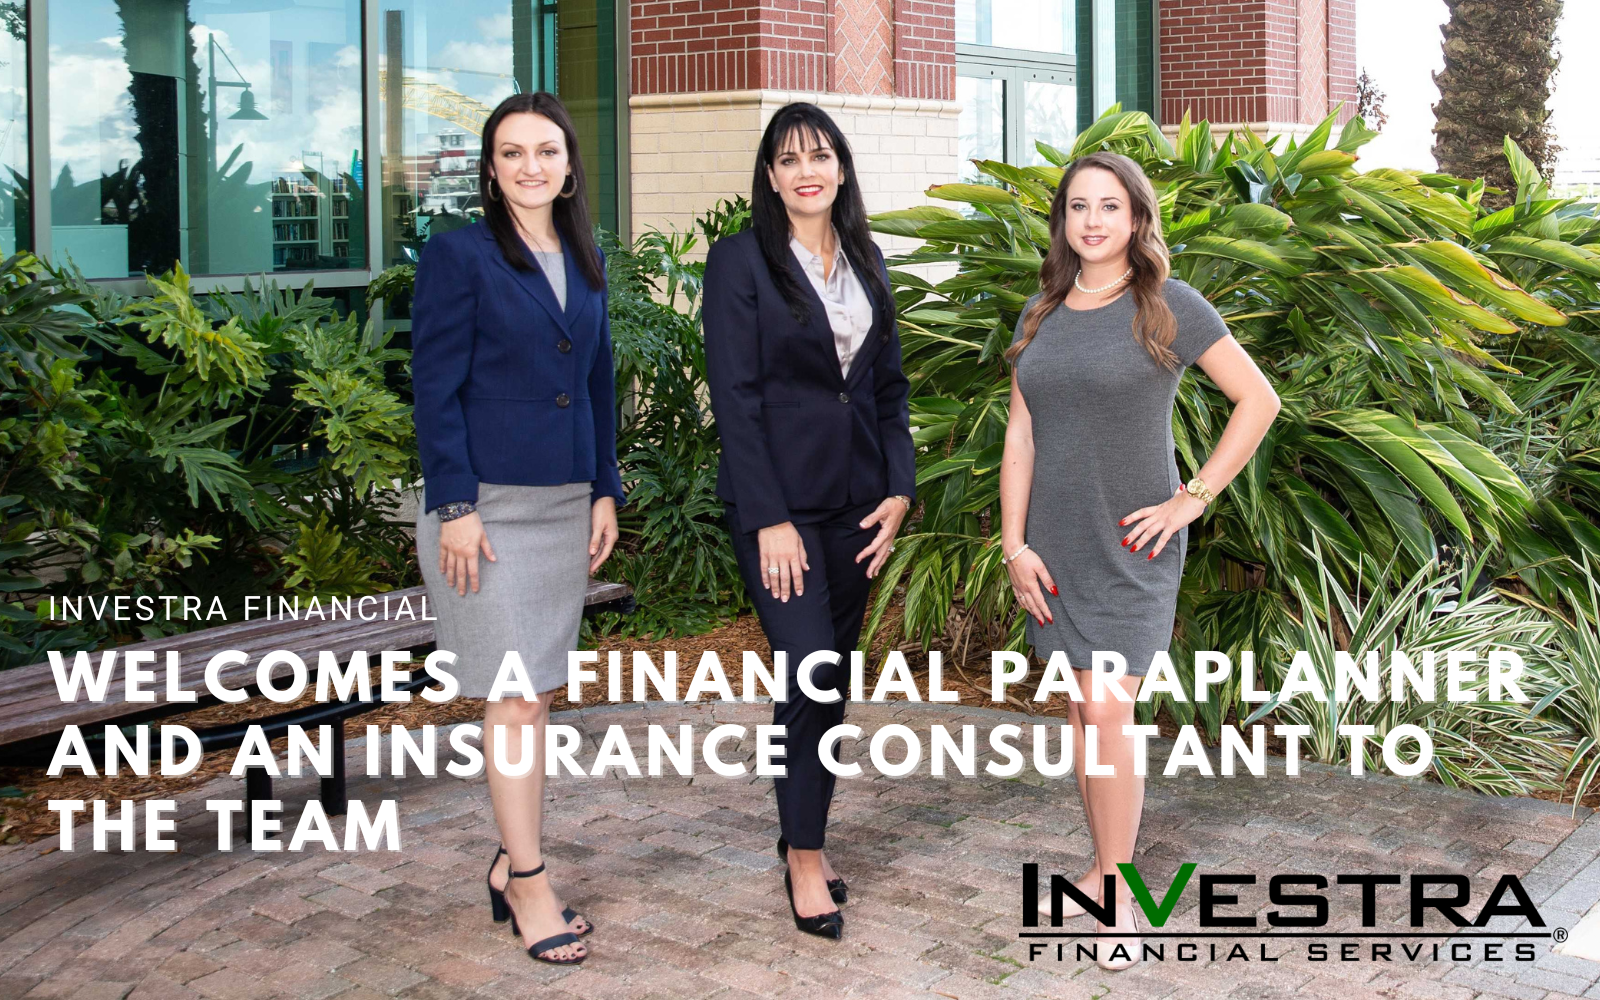 InVestra Adds Financial Paraplanner and Insurance Consultant to the Team